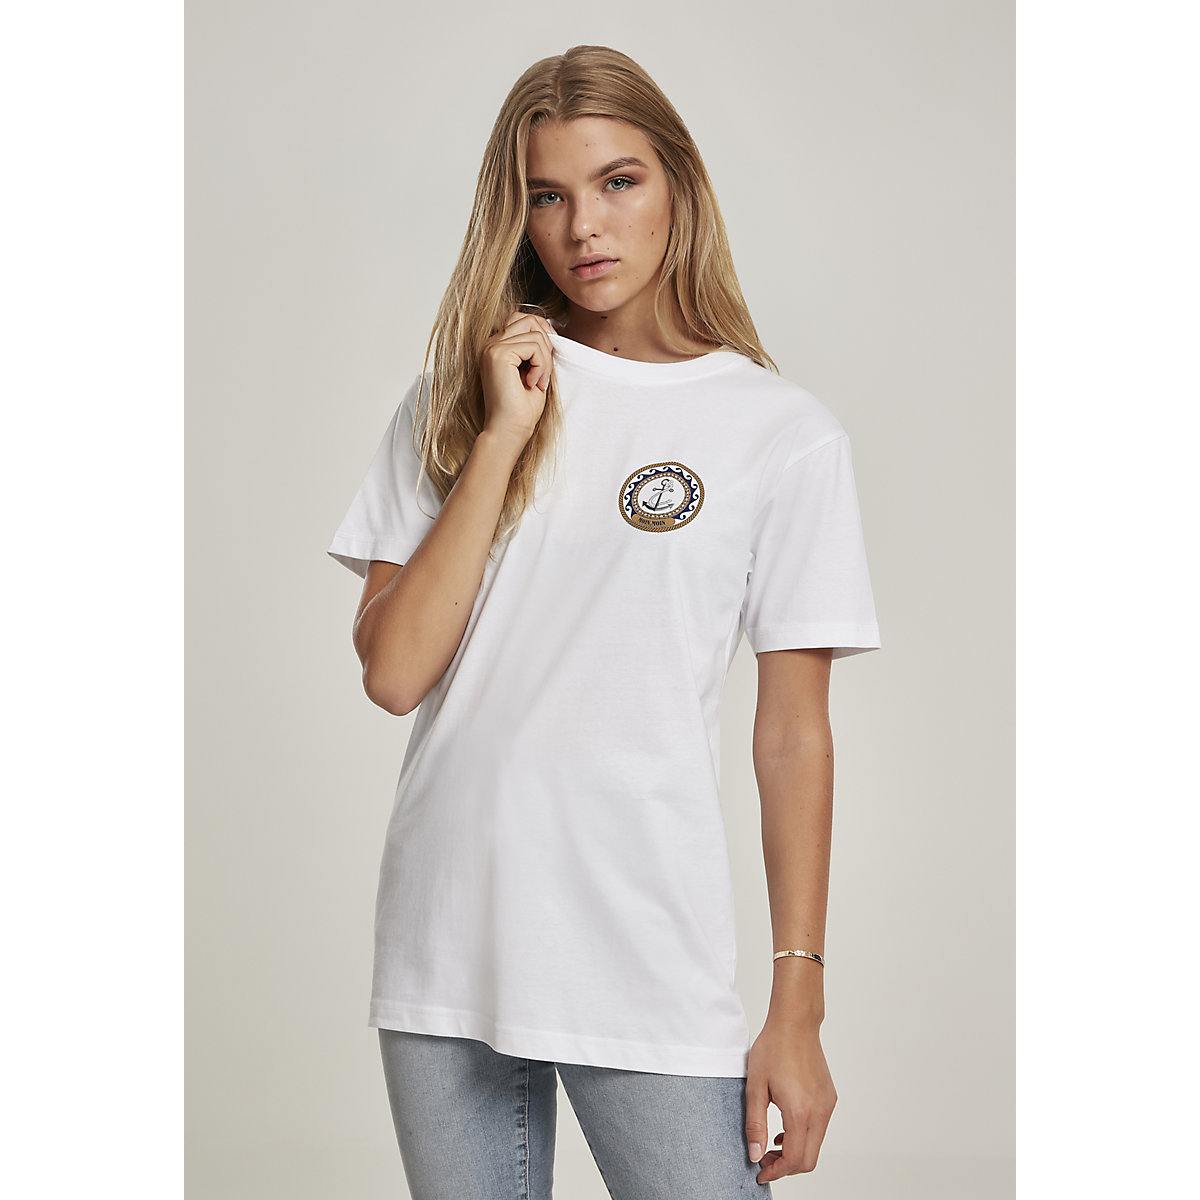 Mister Tee Ladies Moin Moin Tee T-Shirts weiß